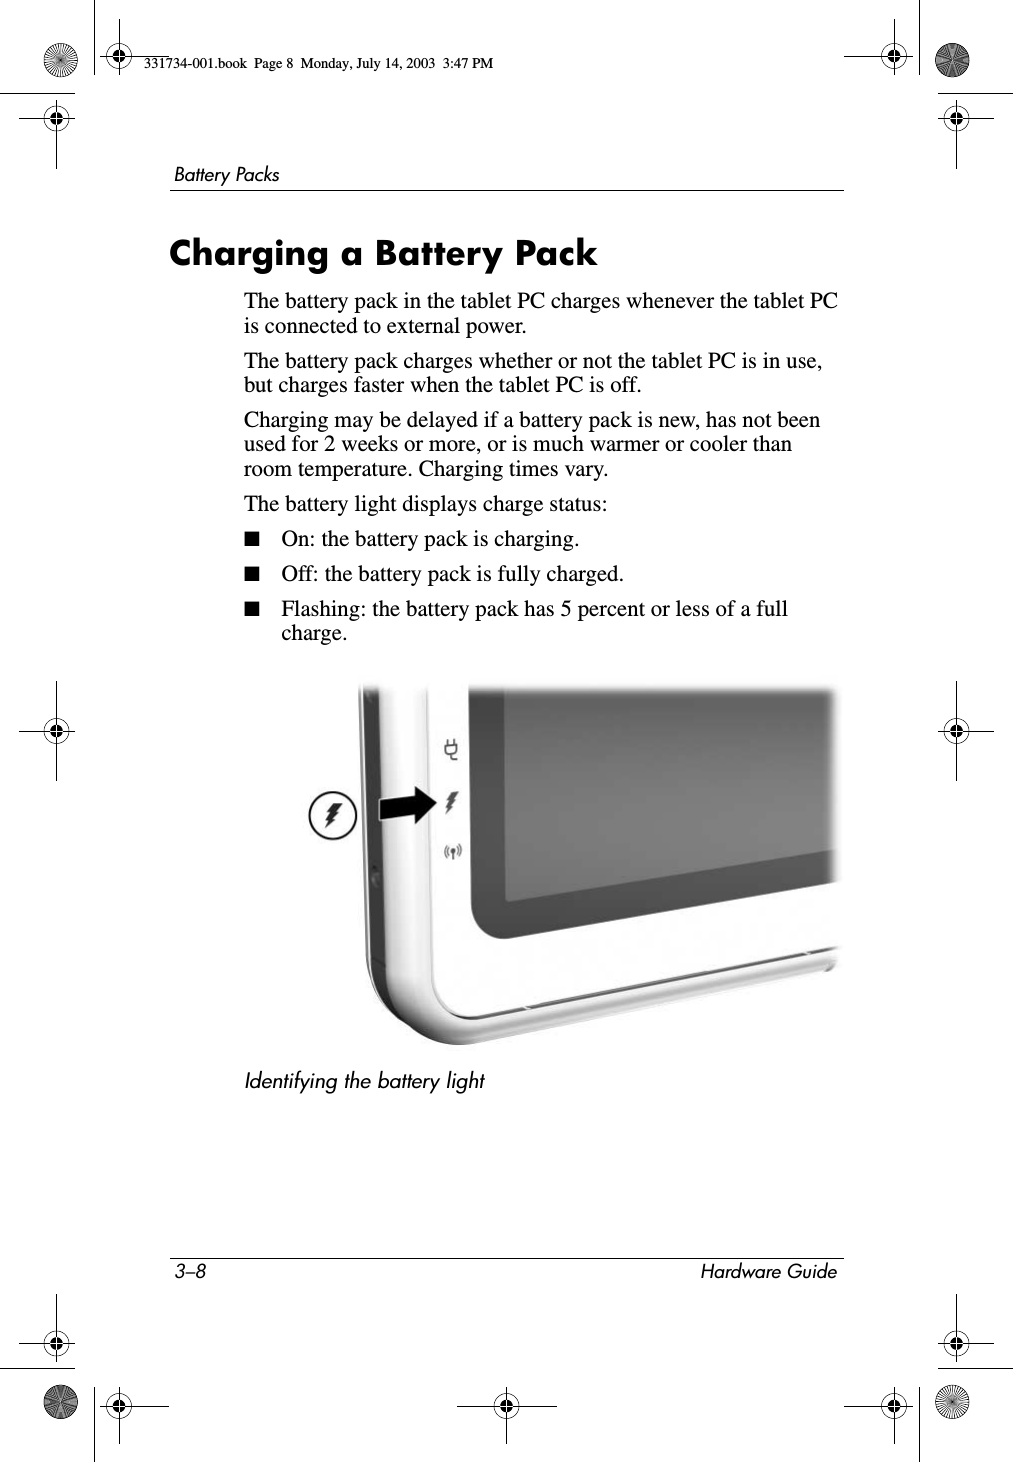 3–8 Hardware GuideBattery PacksCharging a Battery PackThe battery pack in the tablet PC charges whenever the tablet PC is connected to external power.The battery pack charges whether or not the tablet PC is in use, but charges faster when the tablet PC is off. Charging may be delayed if a battery pack is new, has not been used for 2 weeks or more, or is much warmer or cooler than room temperature. Charging times vary.The battery light displays charge status:■On: the battery pack is charging.■Off: the battery pack is fully charged.■Flashing: the battery pack has 5 percent or less of a full charge.Identifying the battery light331734-001.book  Page 8  Monday, July 14, 2003  3:47 PM